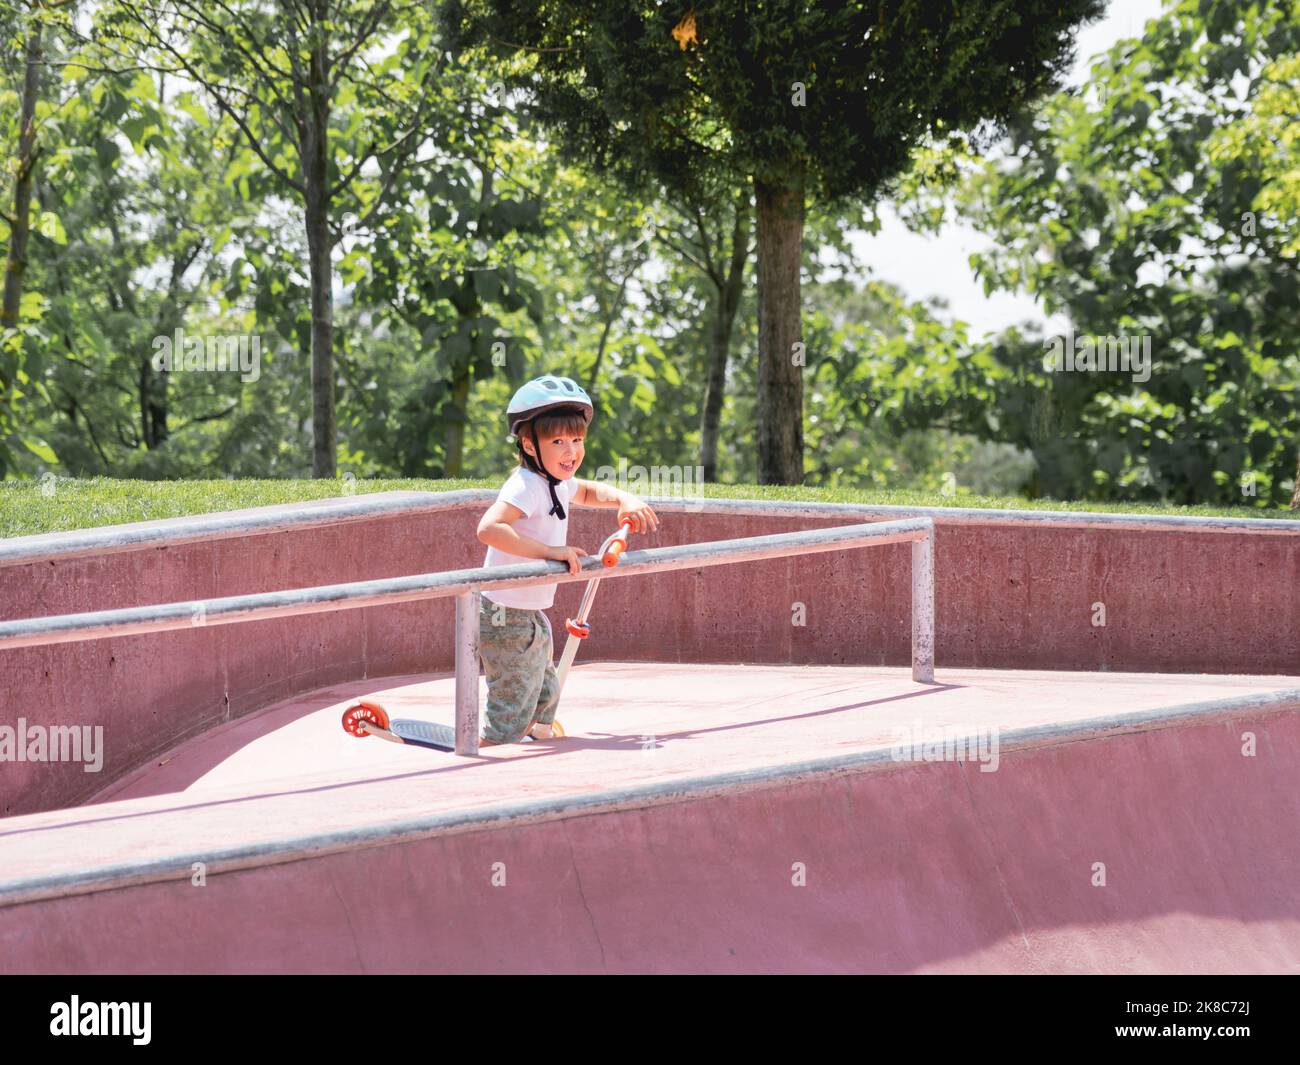 Little boy rides kick scooter in skate park. Special concrete bowl structures in urban park. Training to skate at summer. Stock Photo